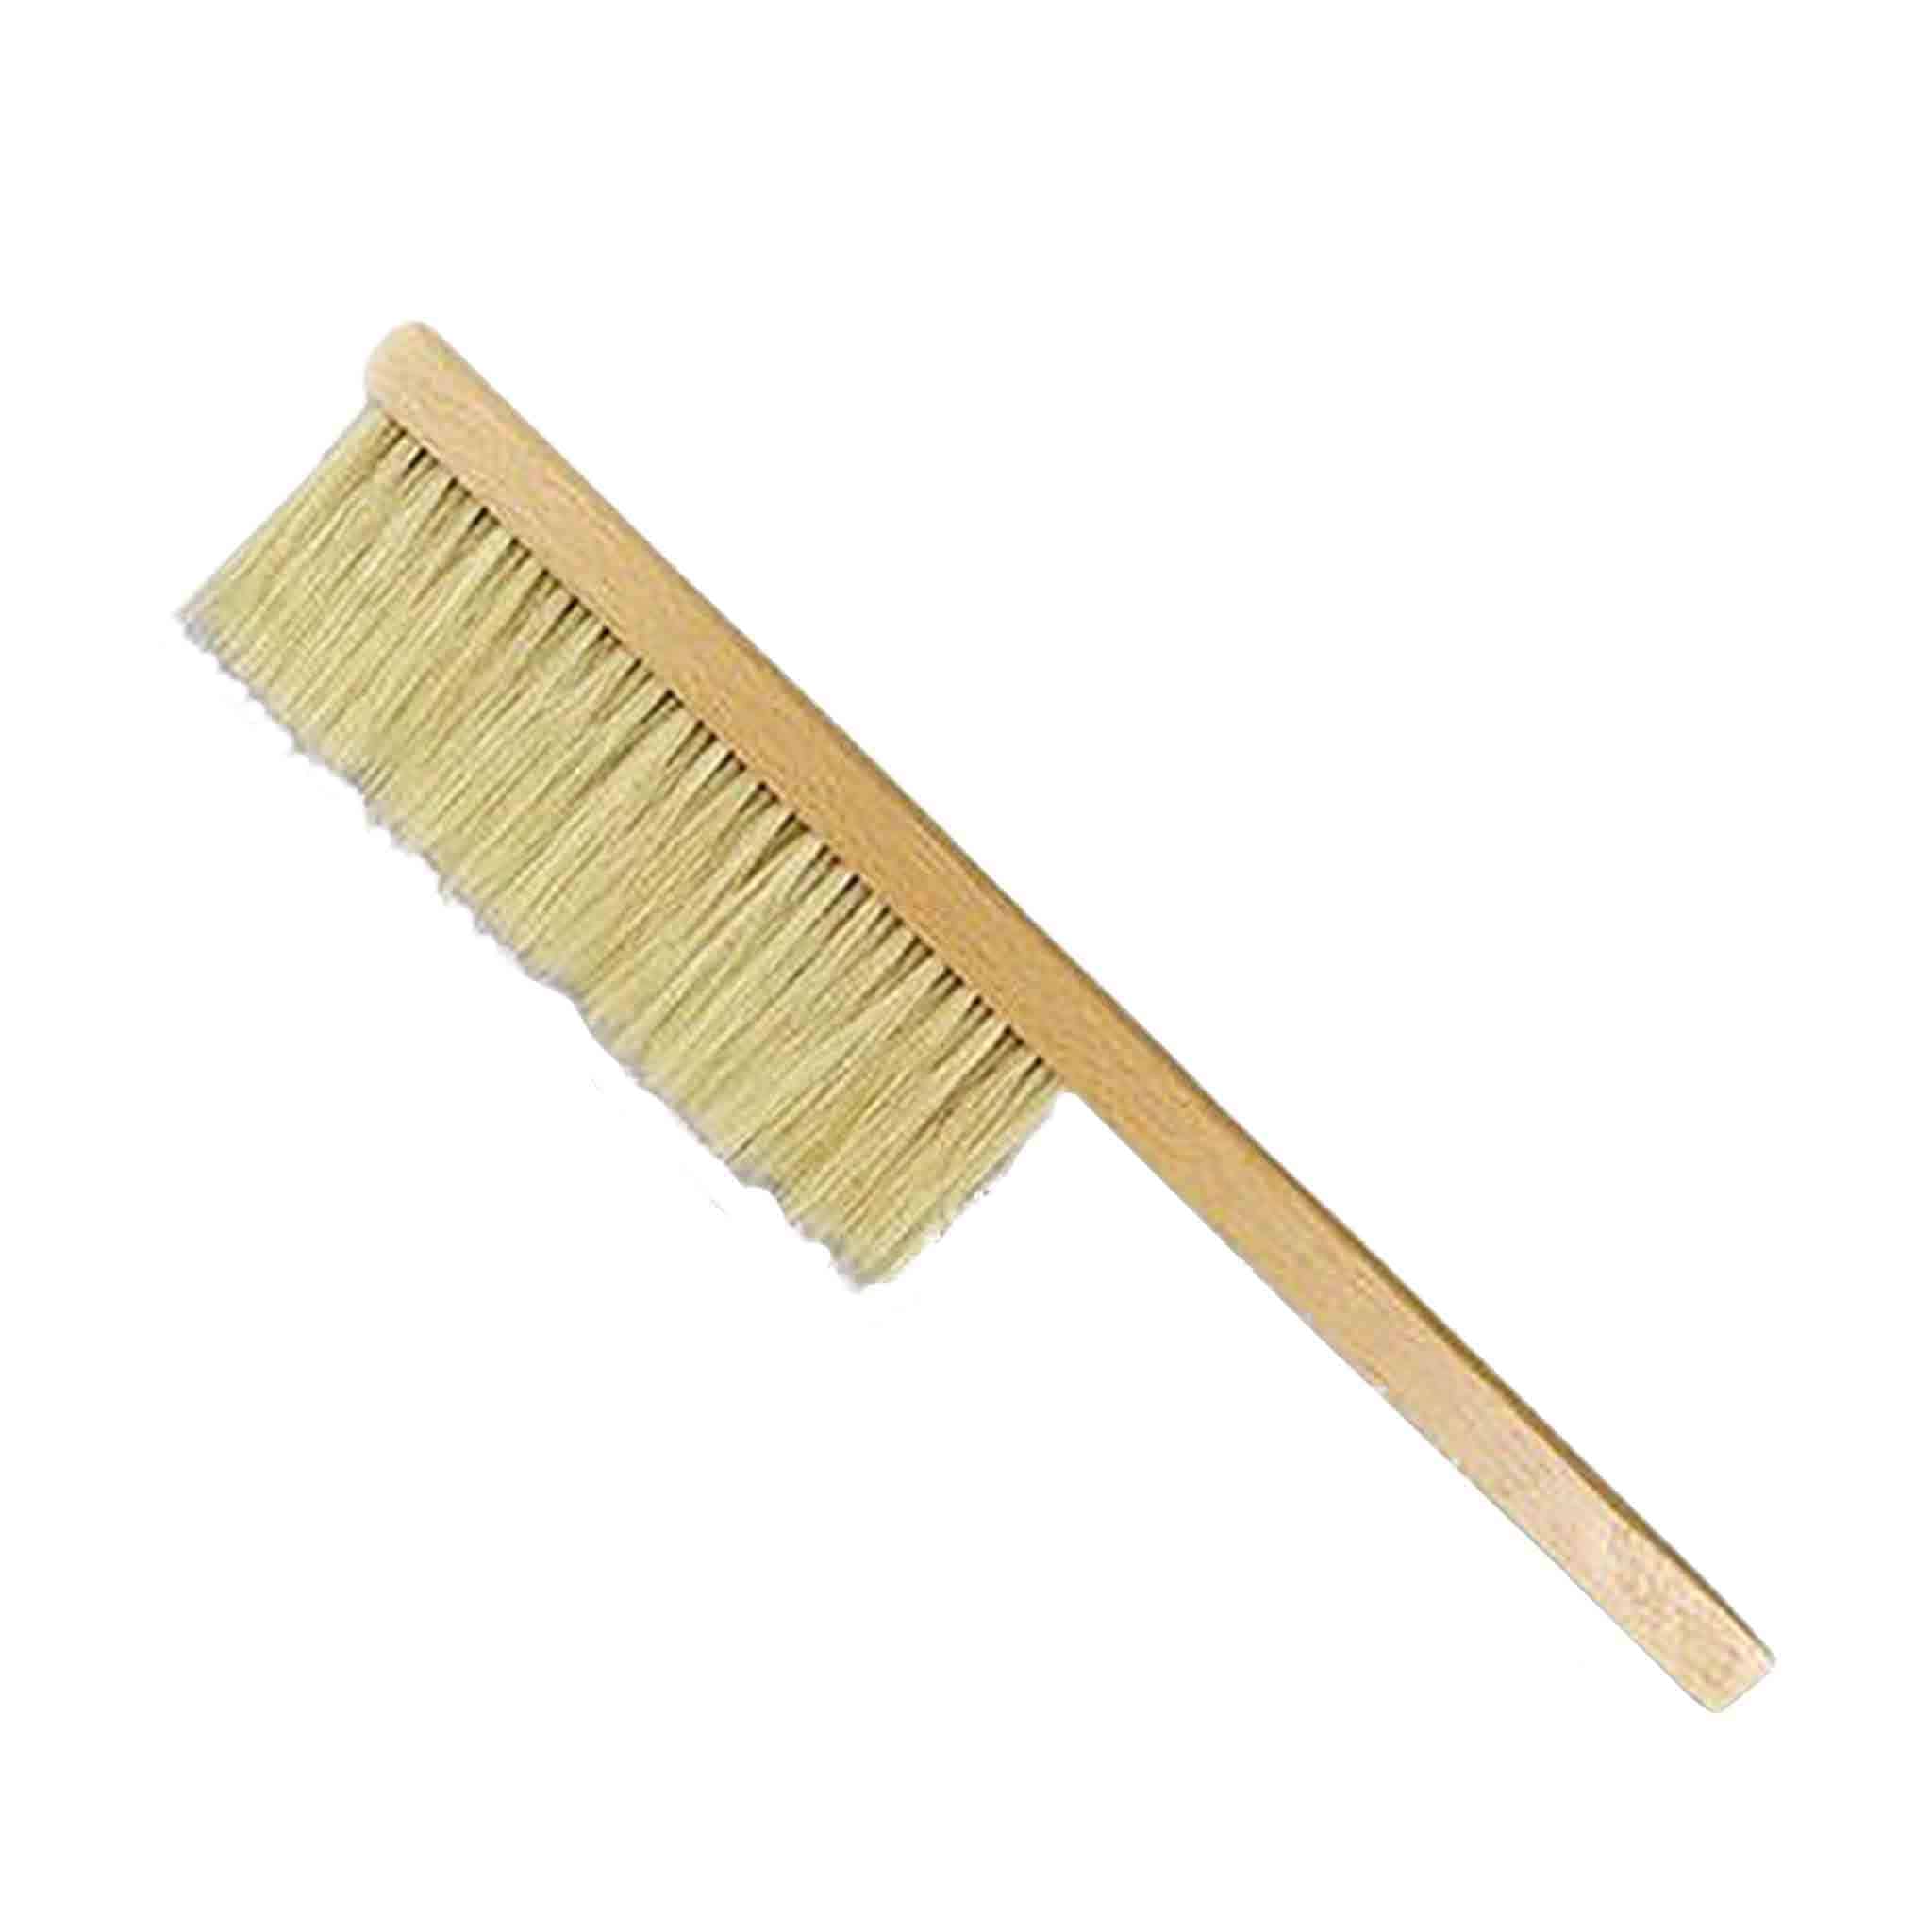 Bee Brush with Double Row of Bristles and Wooden Handle - Tools collection by Buzzbee Beekeeping Supplies